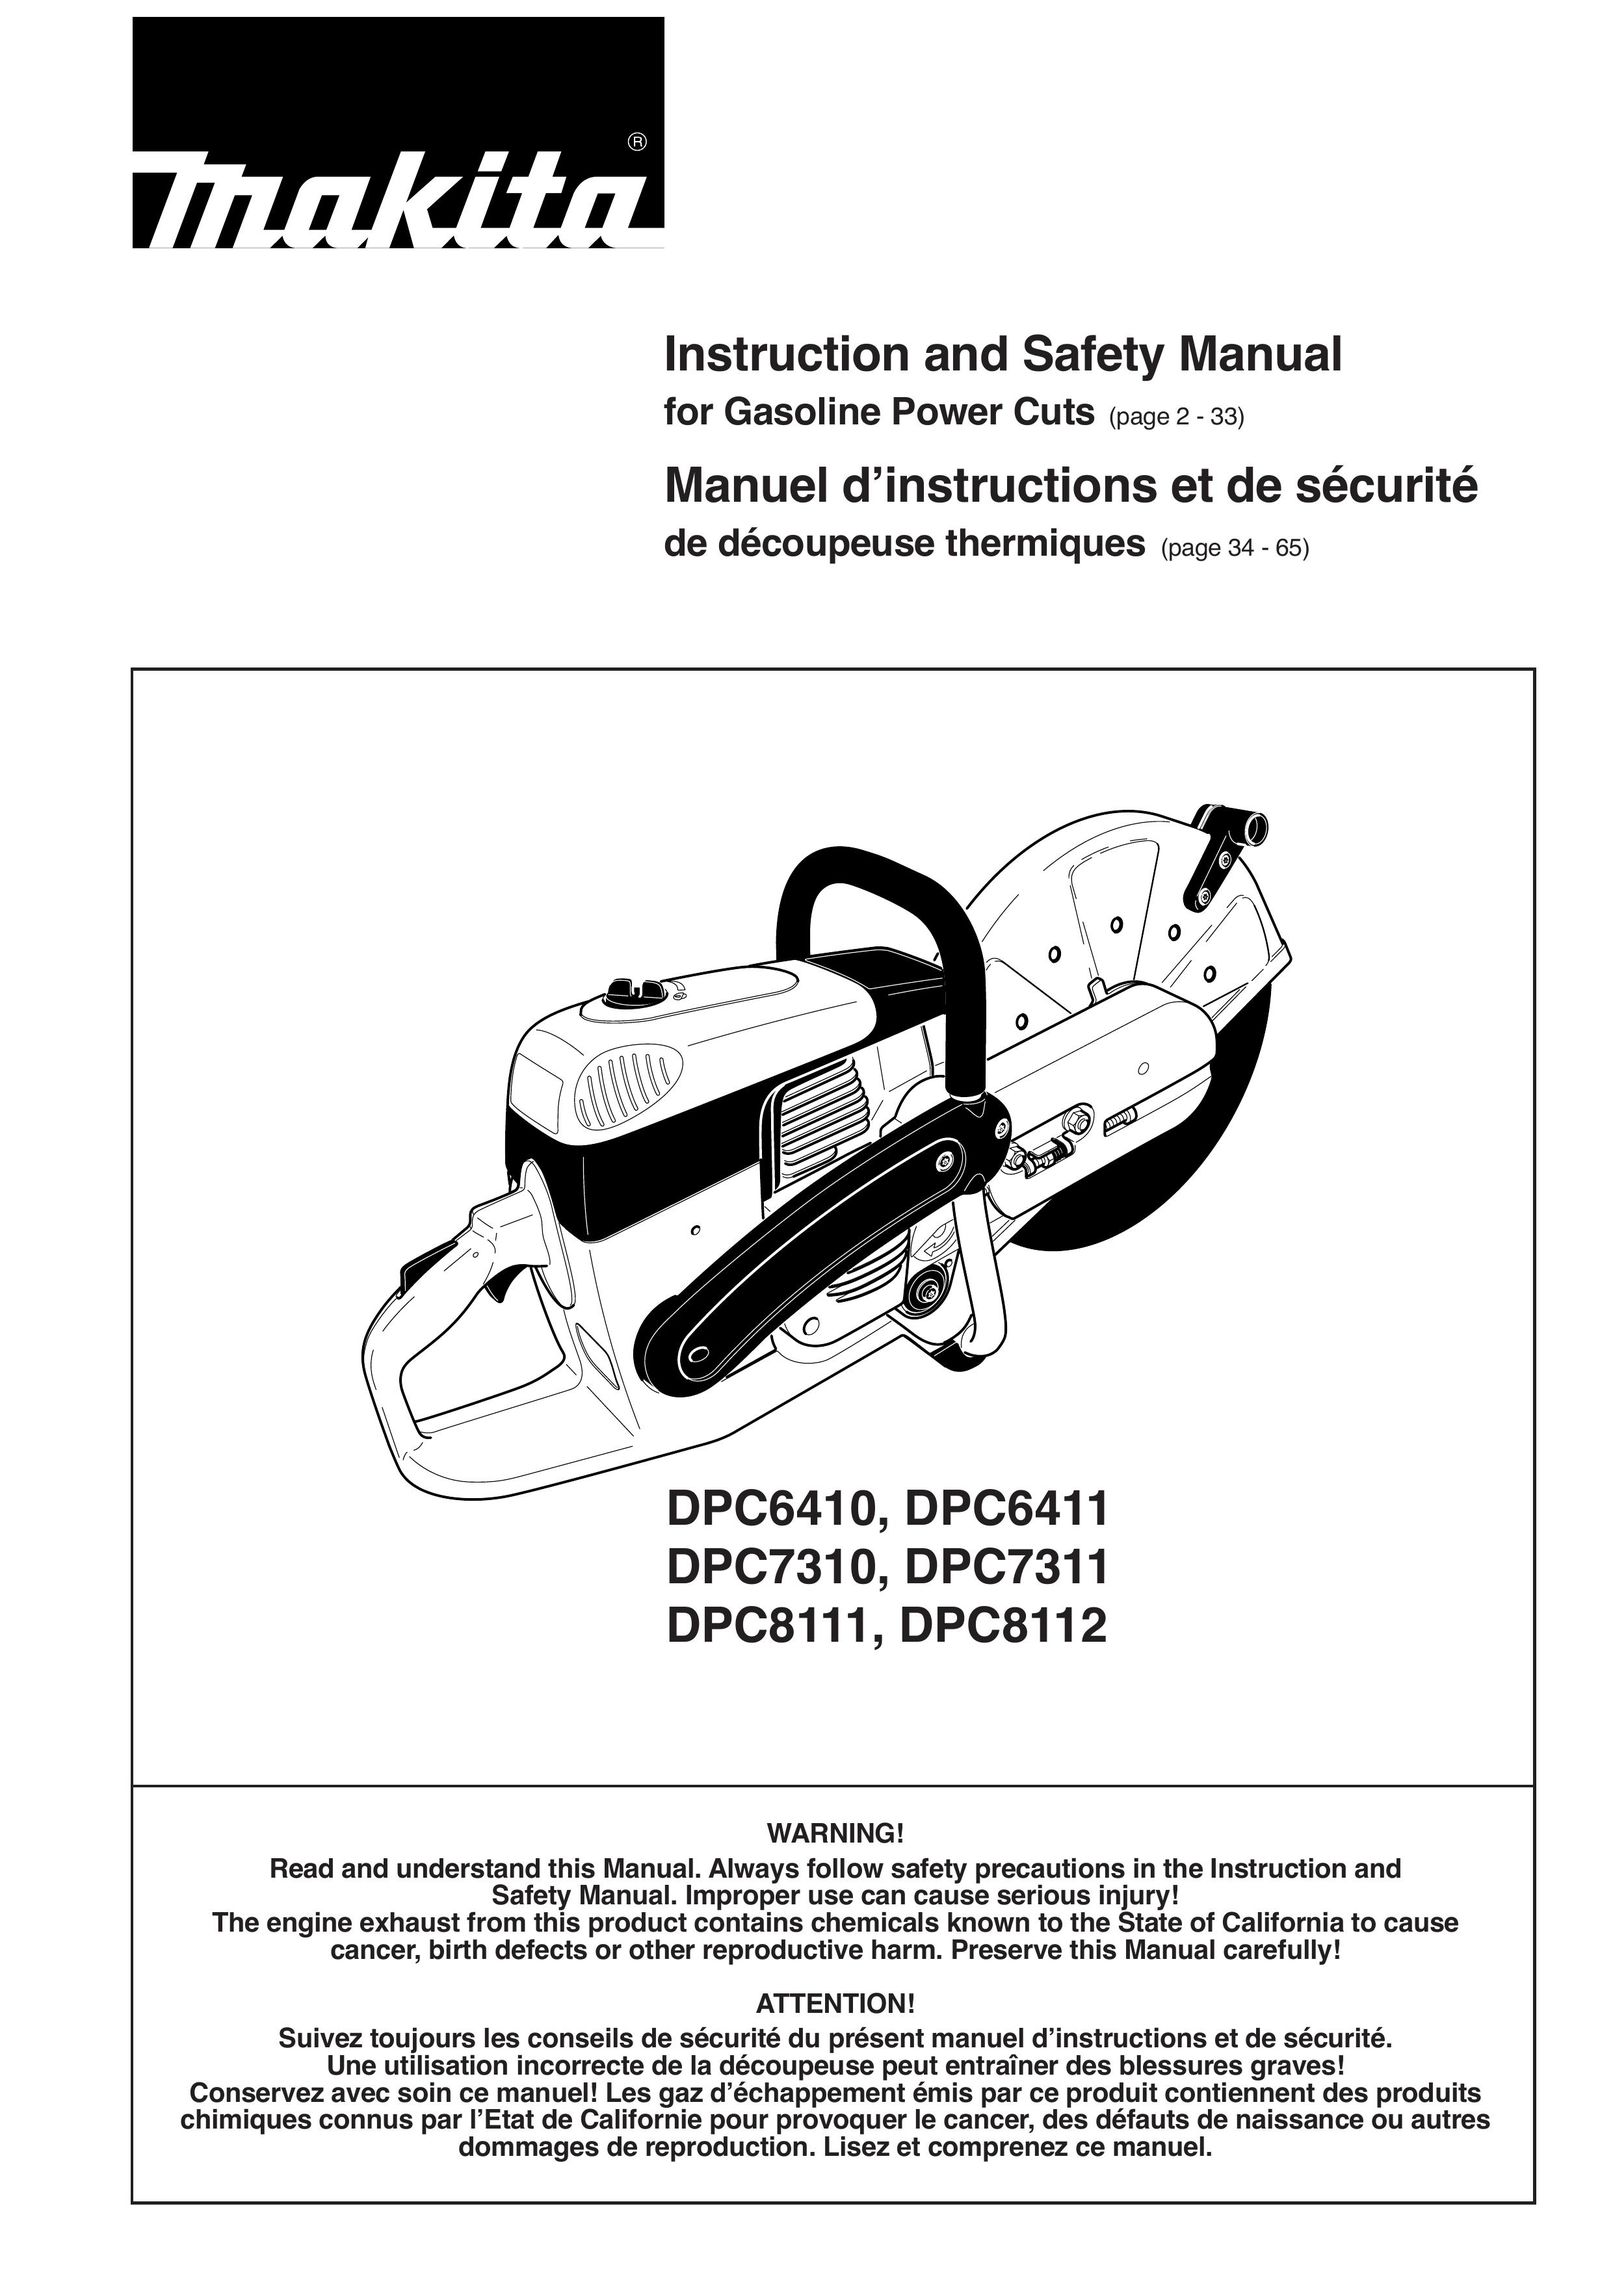 Northern Industrial Tools DPC8112 Saw User Manual